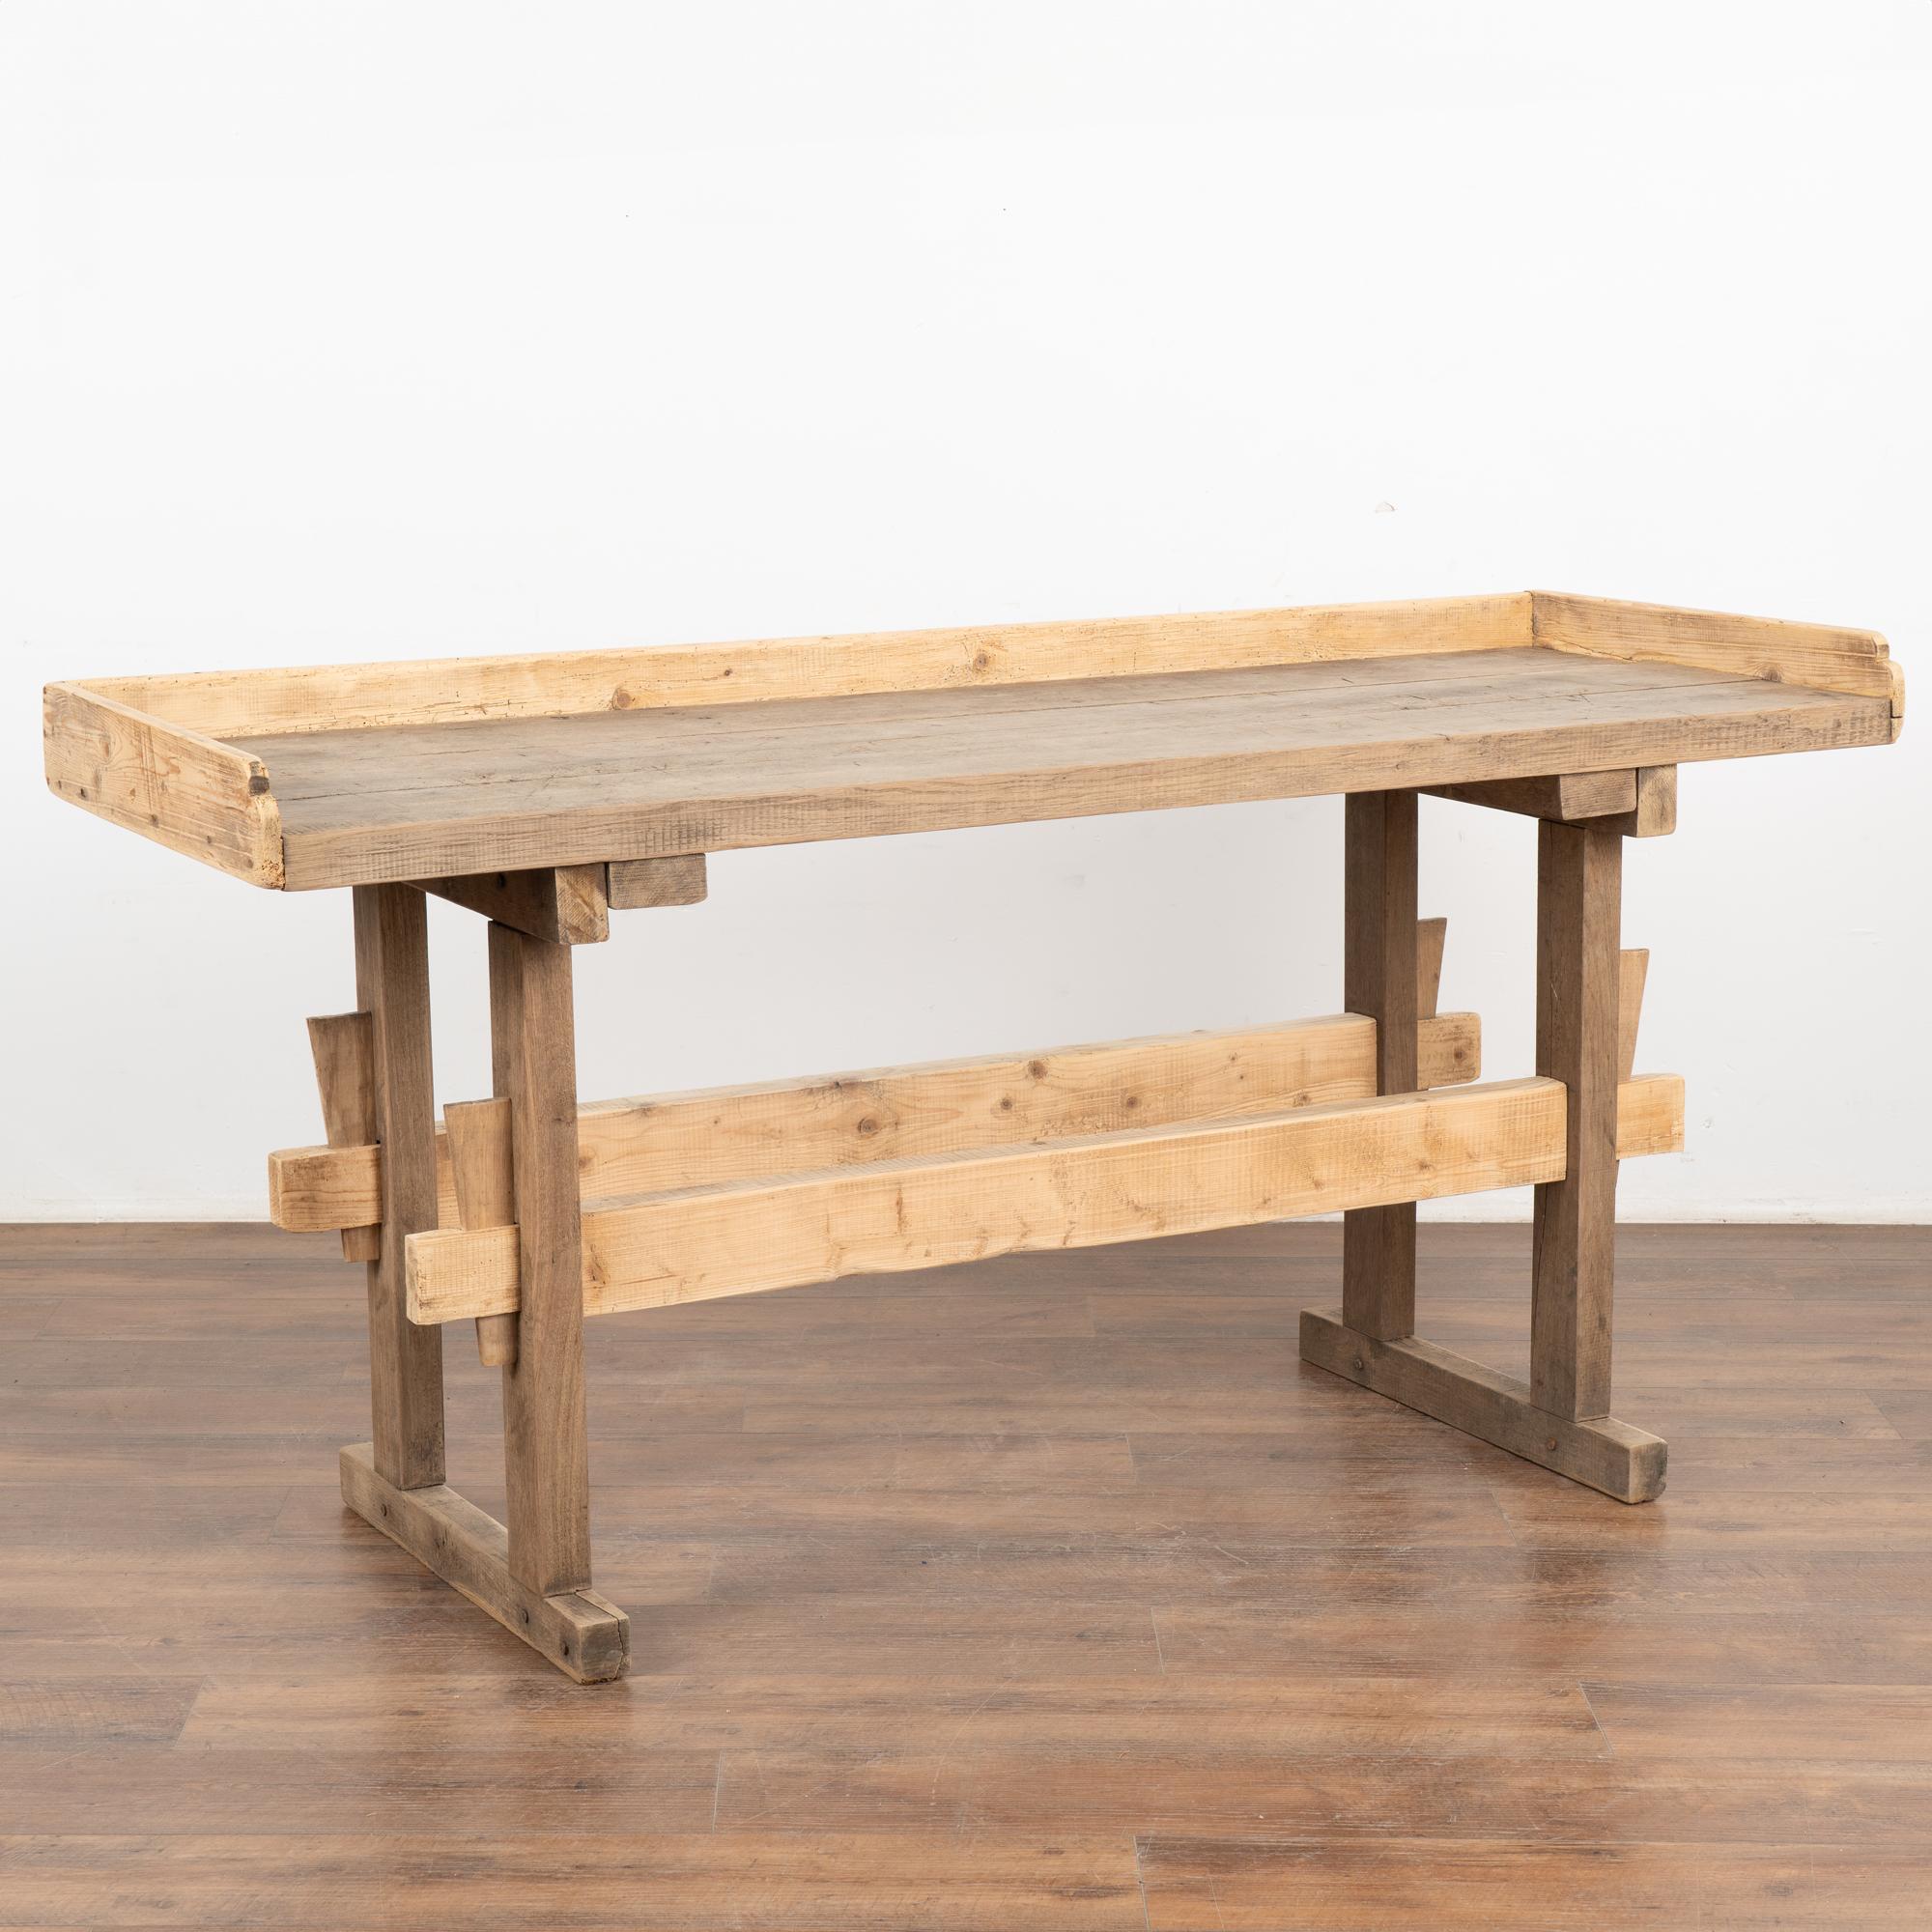 The strong appeal of this rustic console table comes from the well worn top reflecting generations of use.
It originally served as a work table, resulting in the worn patina with deep gouges, cracks, scrapes, stains, and old gnarls.
A back and side